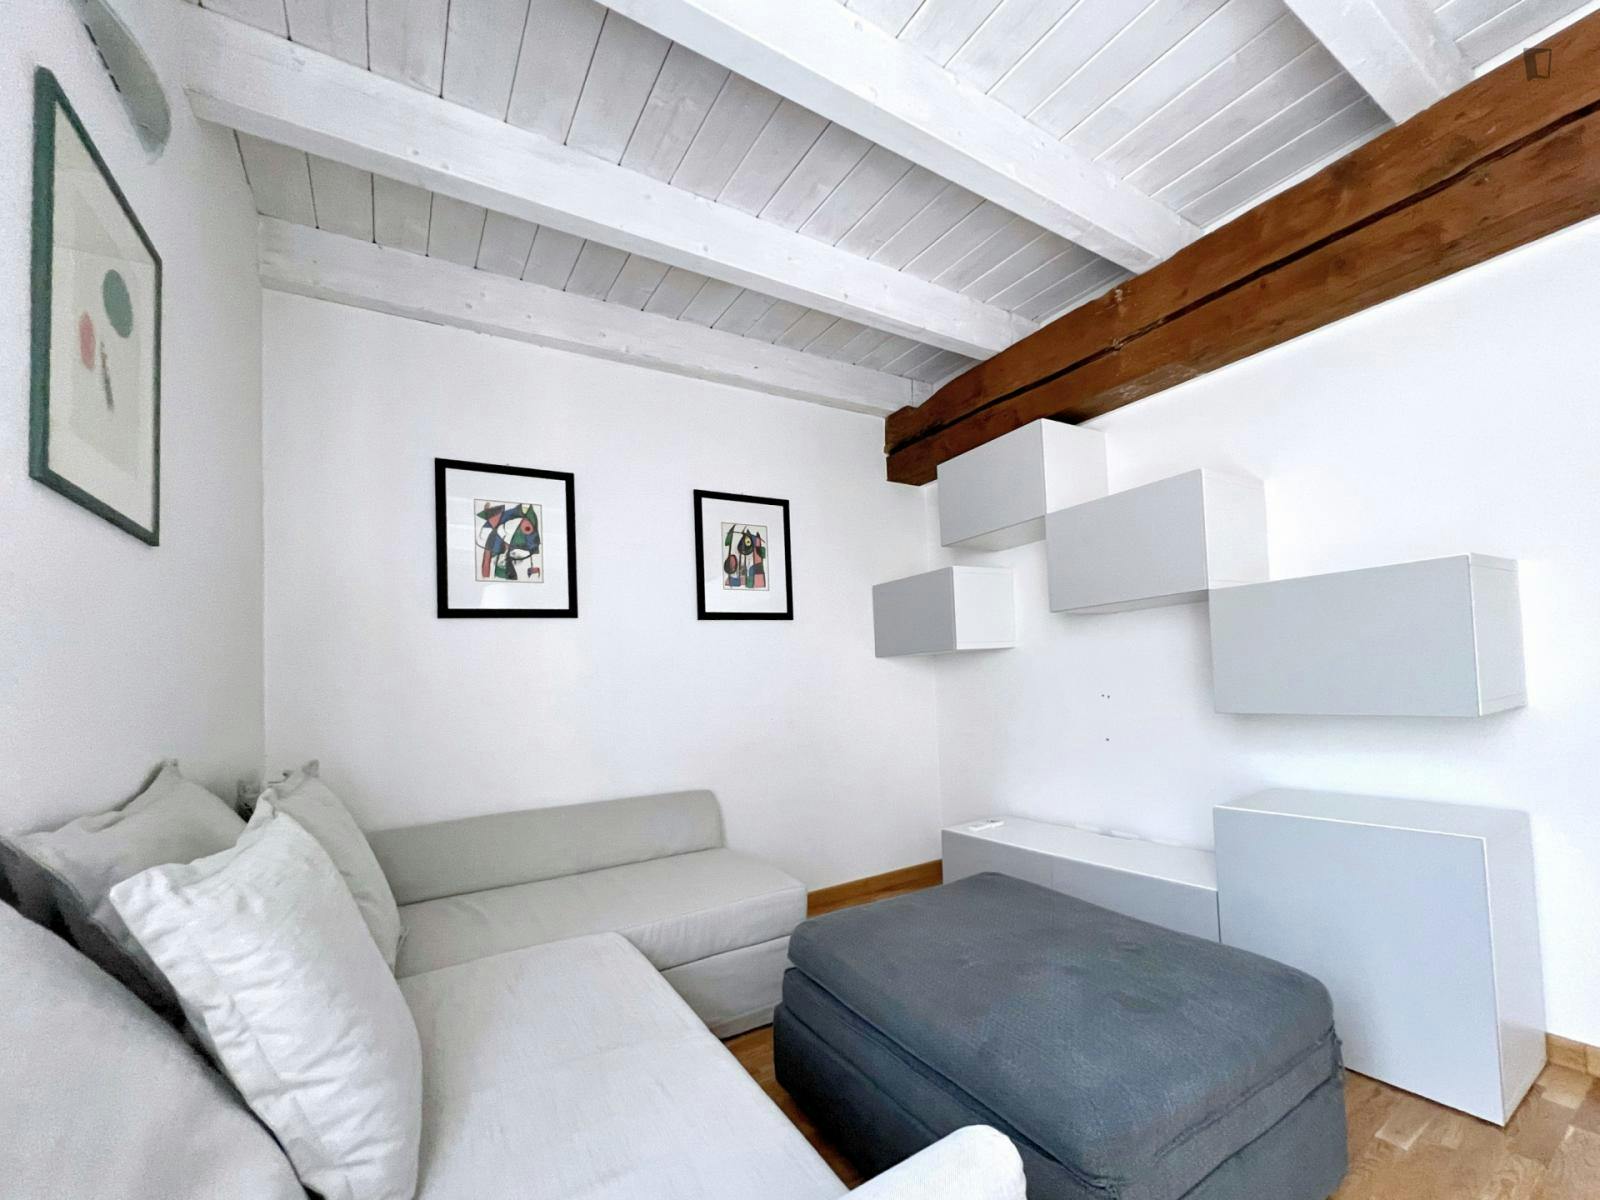 Lovely 1-bedroom apartment close to Piazza Santo Stefano